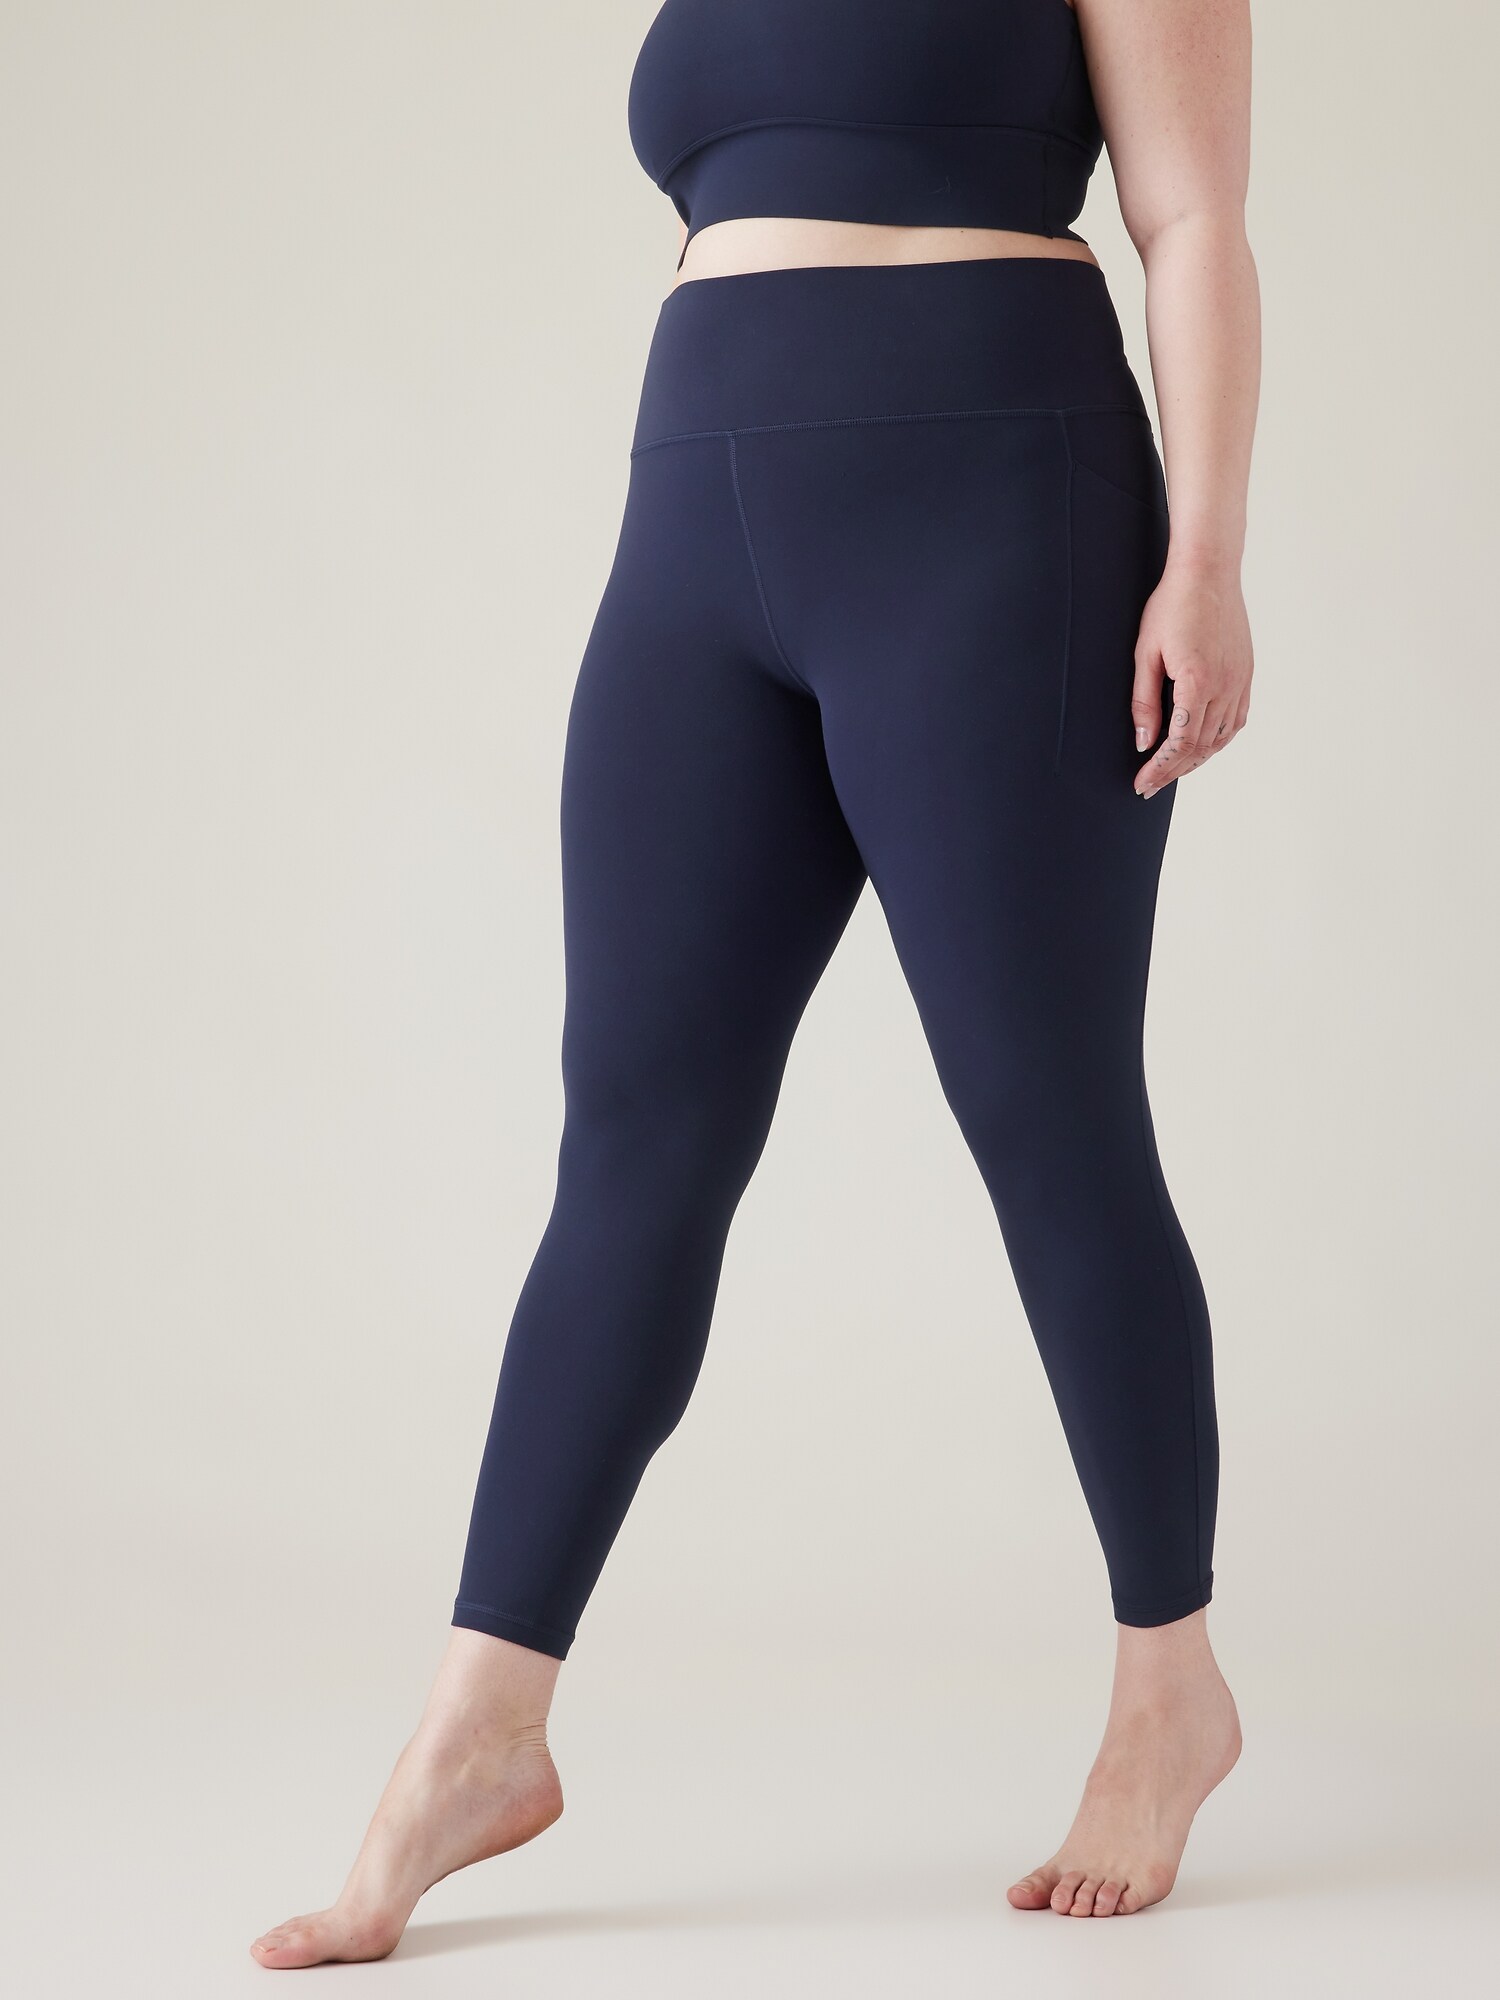 Athleta blue dotted mesh powervita navy leggings size small lace cutout  tights - $40 - From Karis